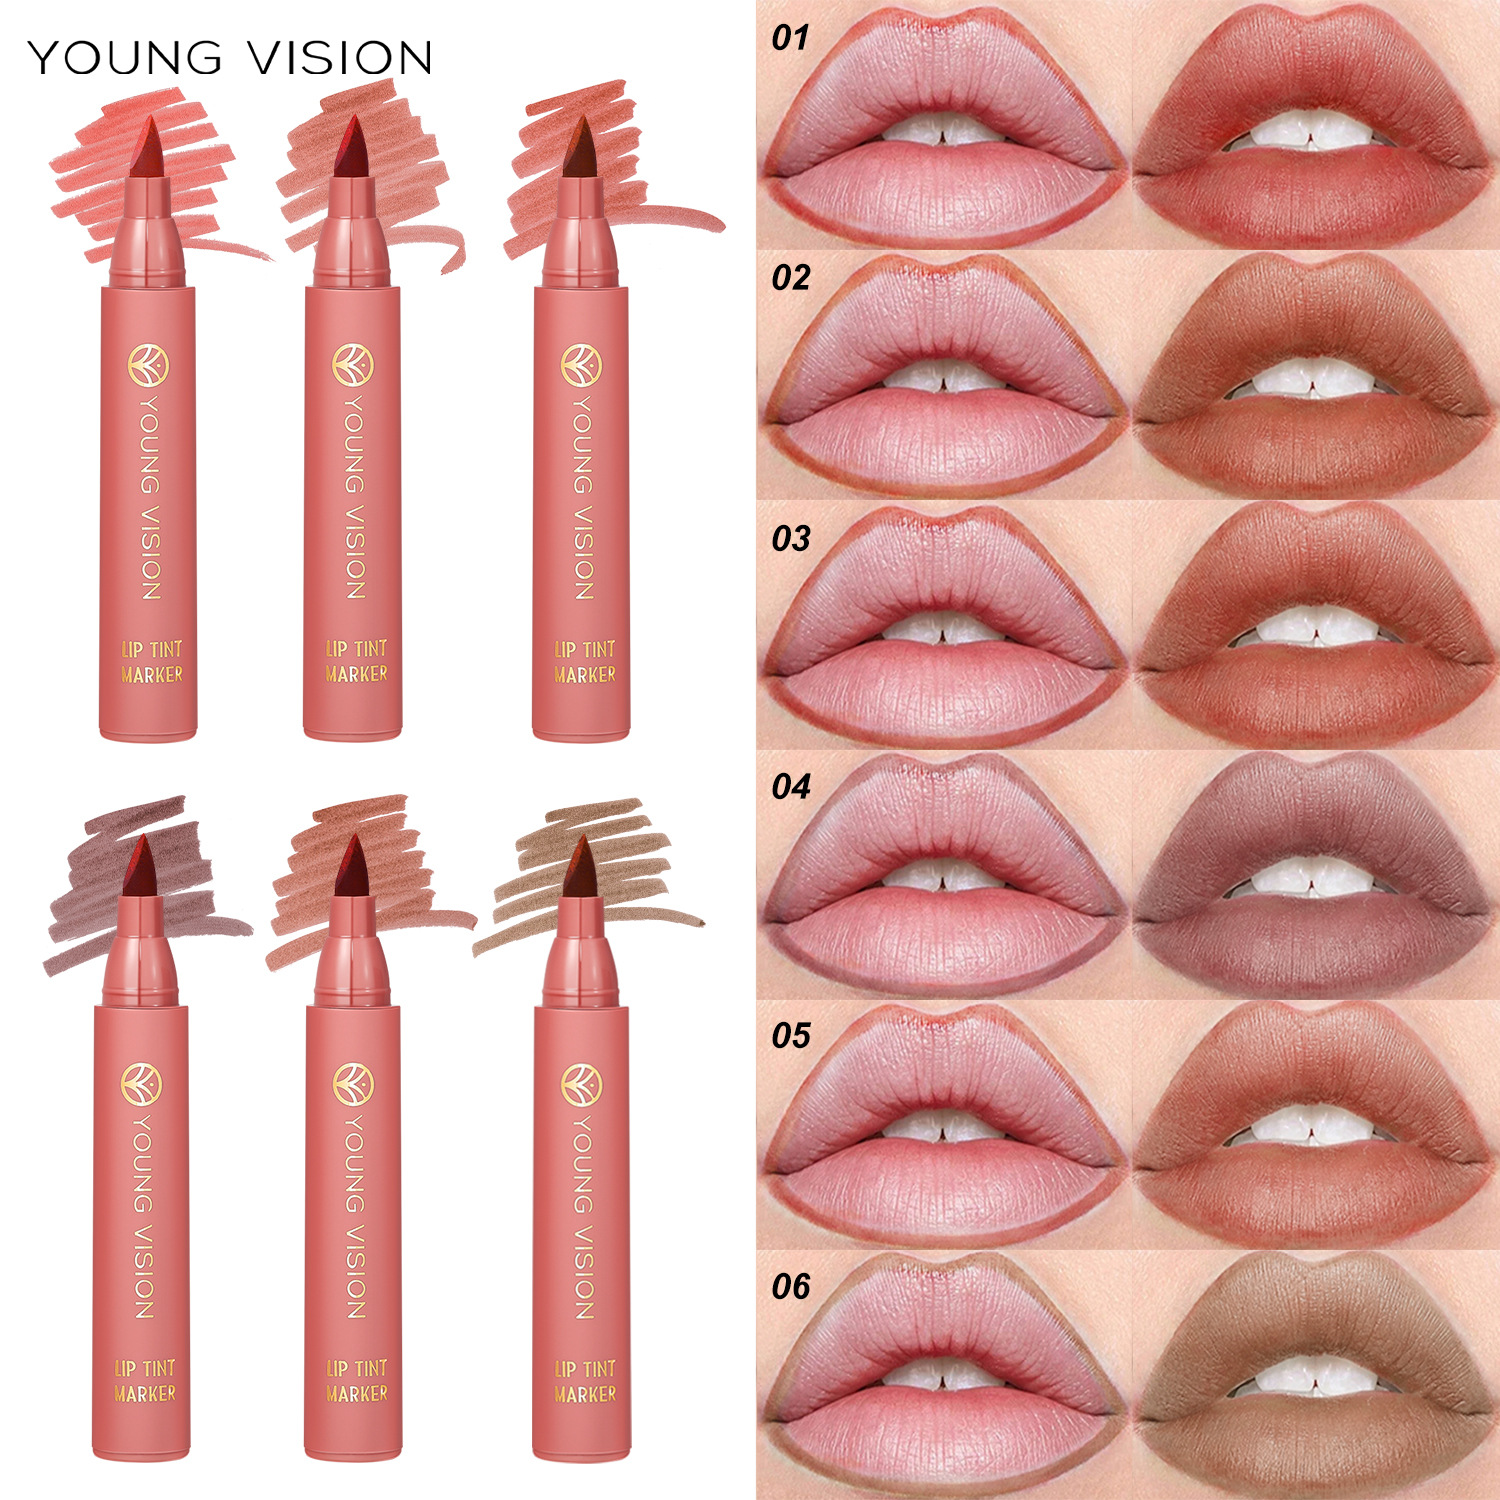 Young Vision Lip Stain Pen 3 Color Lipstick Water Set Lip Liner Matte No Stain on Cup Lip Stain